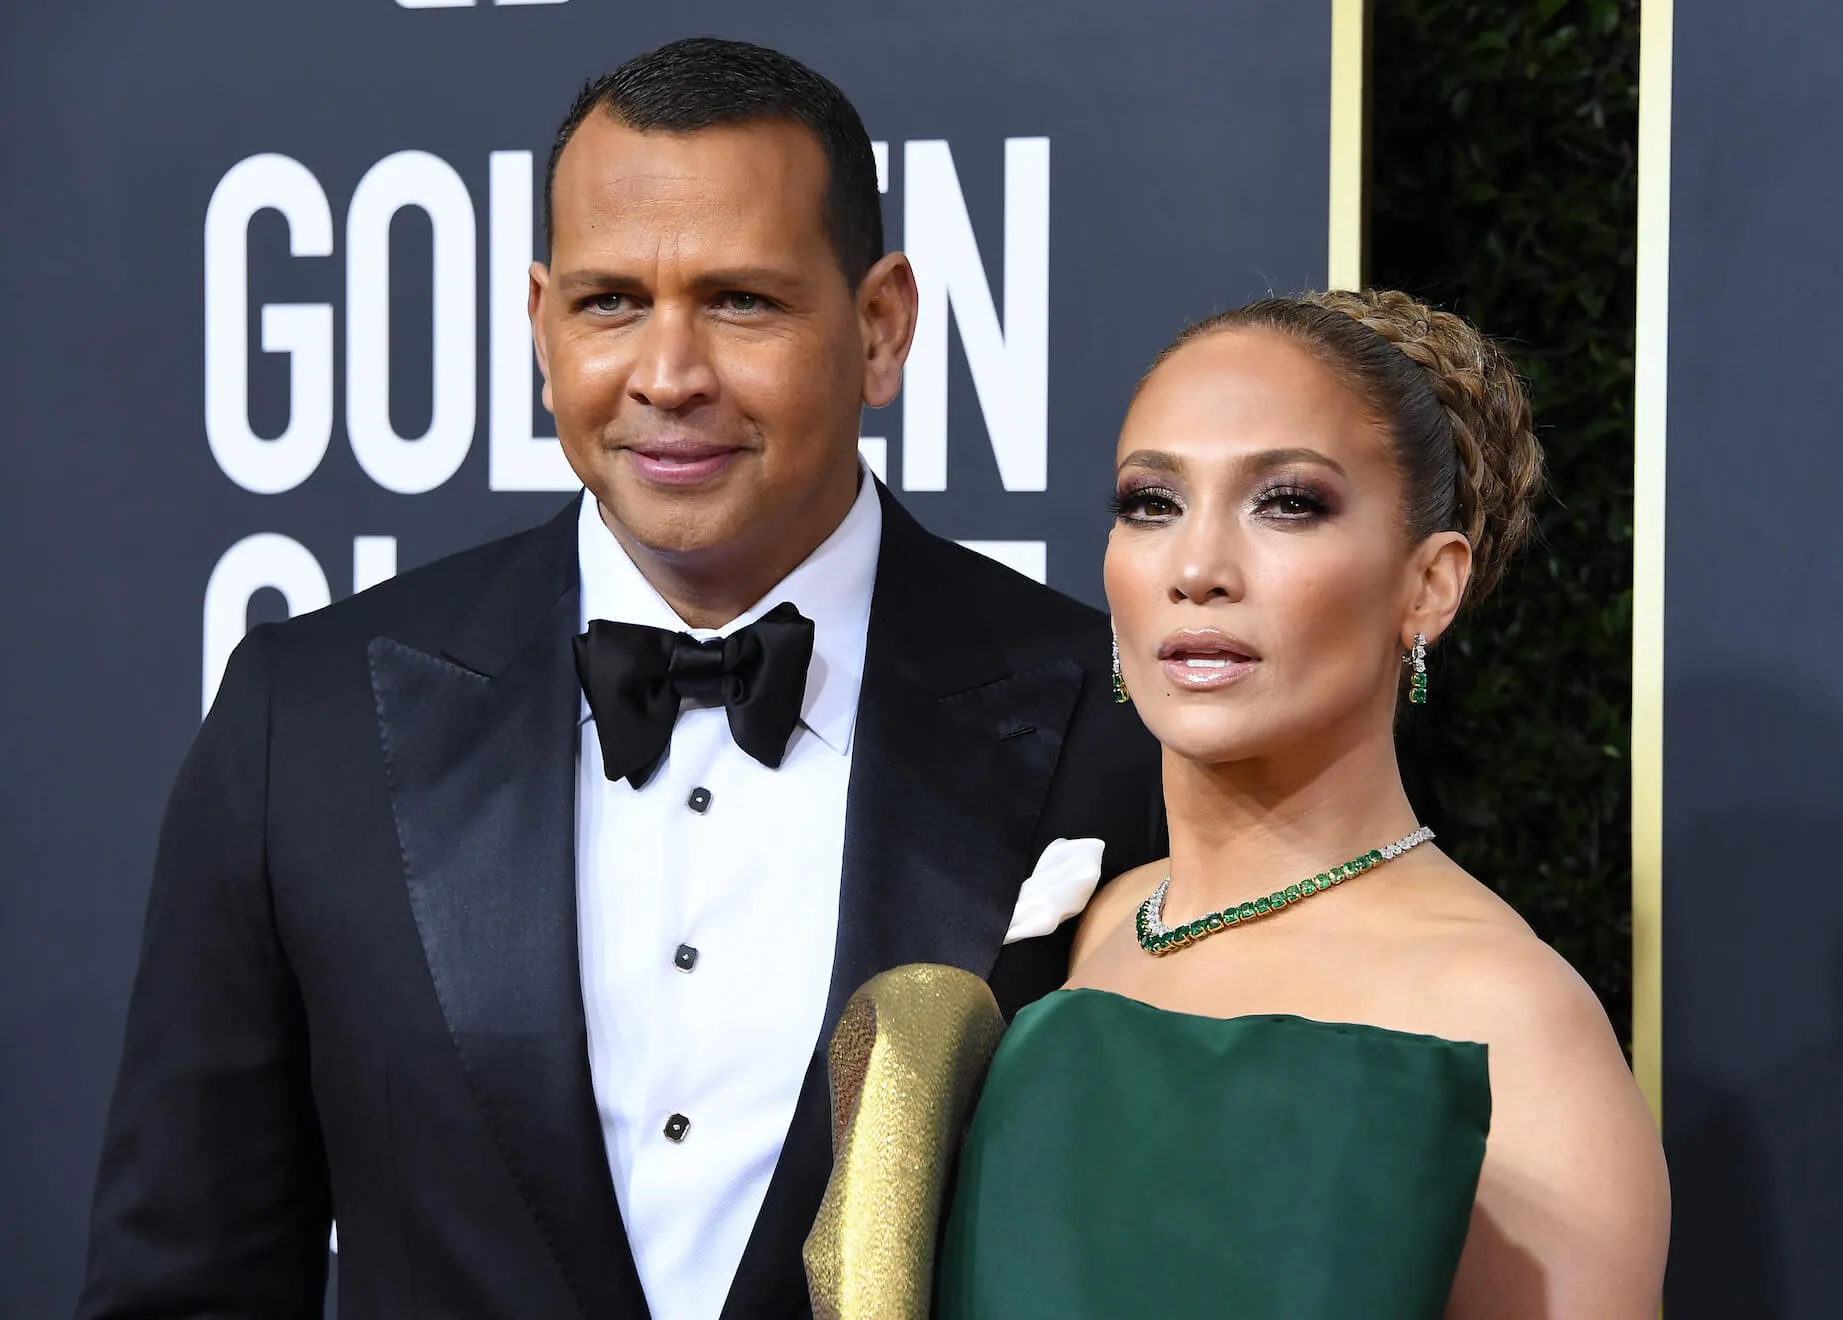 Jennifer Lopez and Alex Rodriguez posing next to each other at the 77th Annual Golden Globe Awards in 2020. Lopez is wearing a green dress and Rodriguez is wearing a tuxedo.